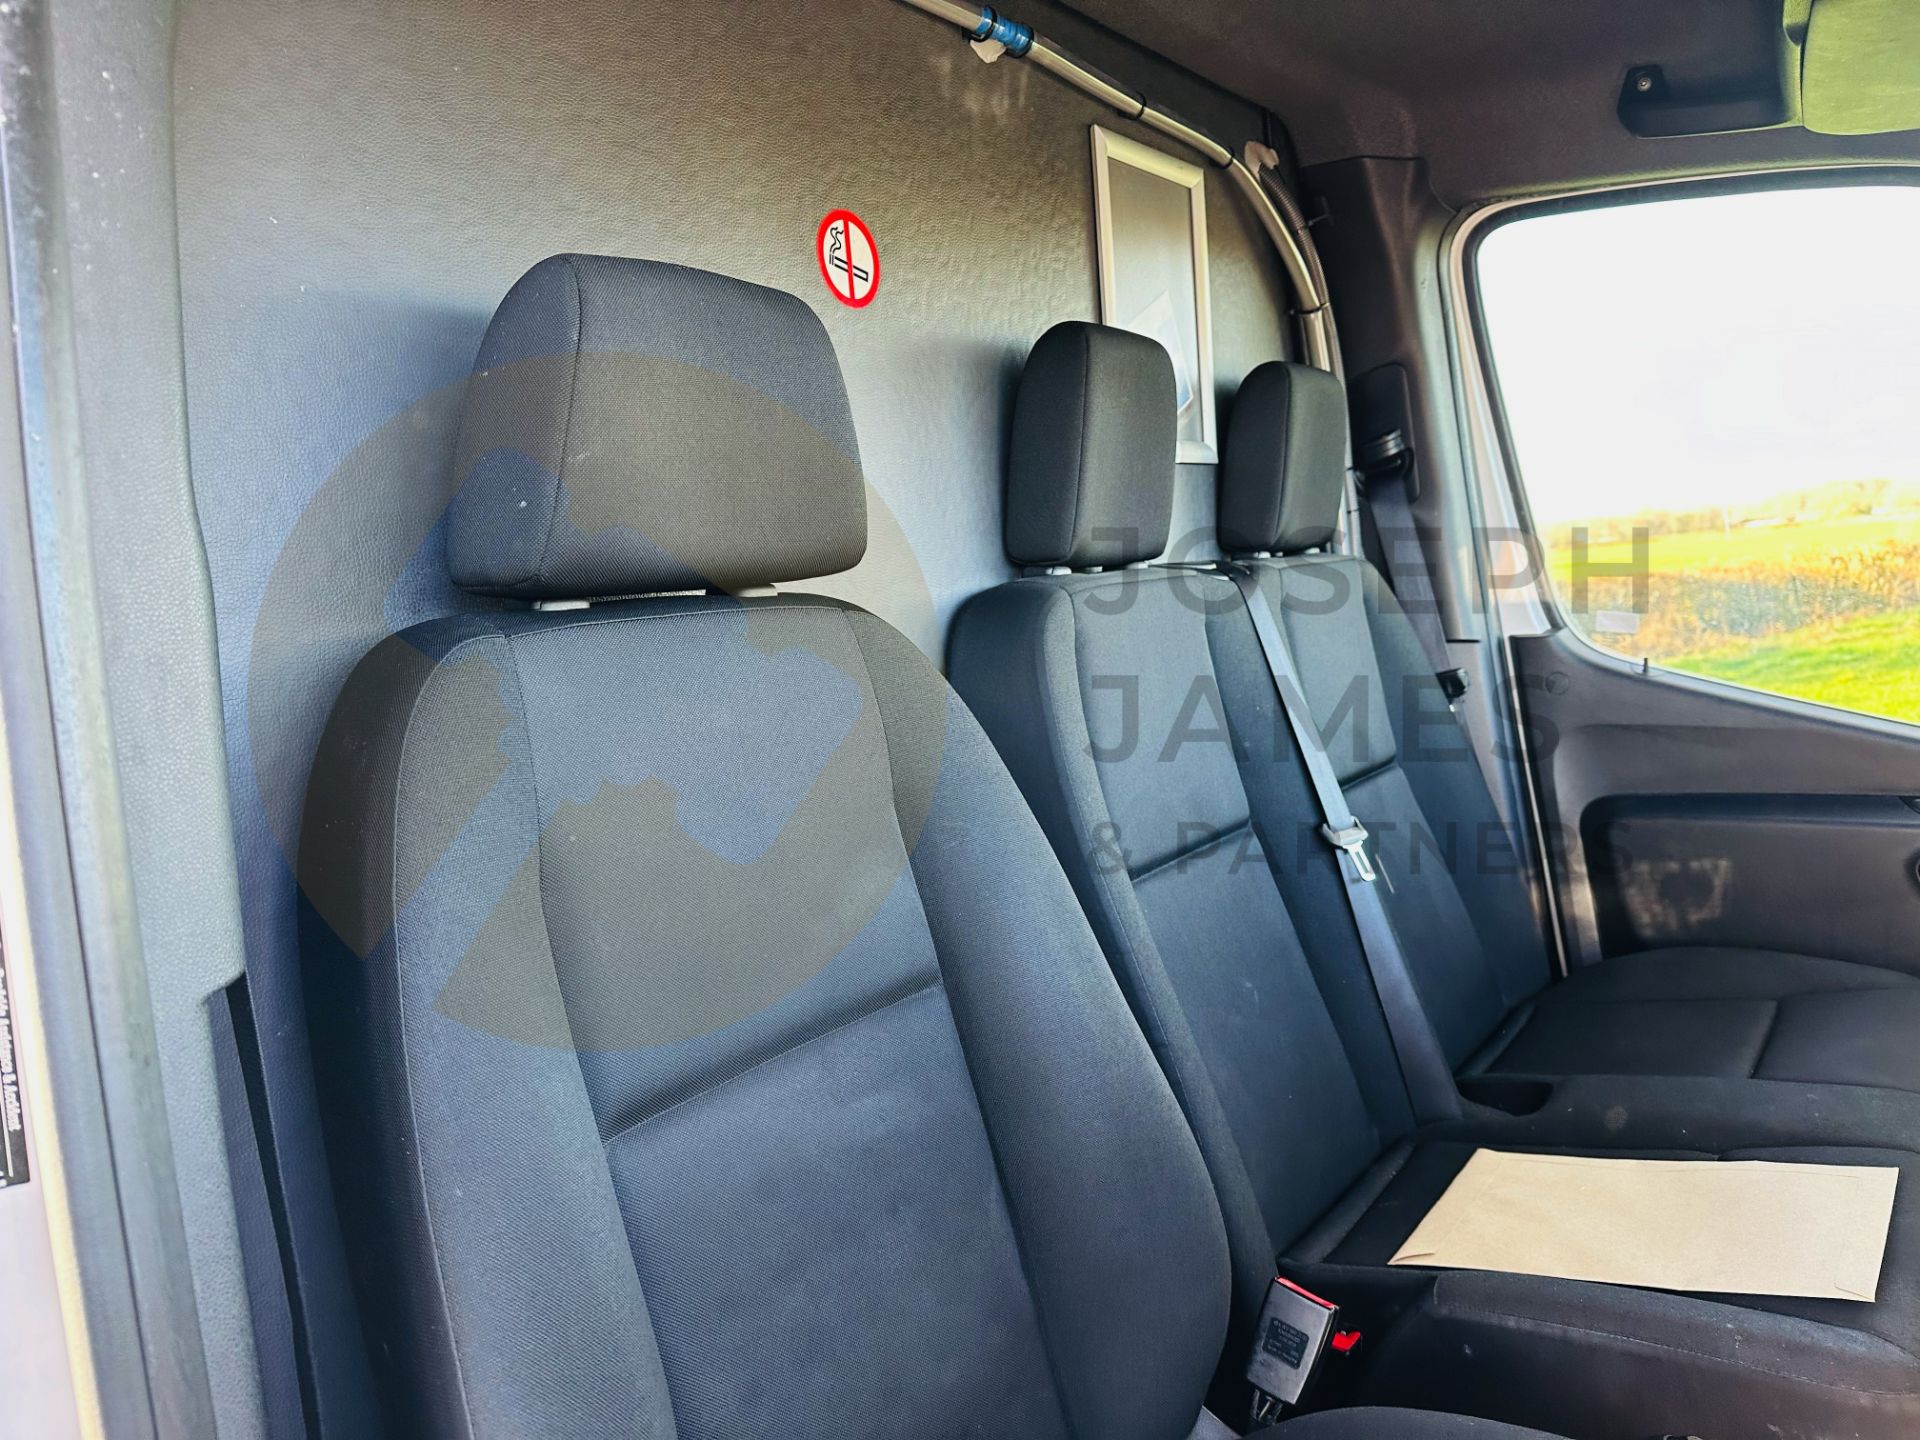 MERCEDES-BENZ SPRINTER 314 CDI *MWB - REFRIGERATED VAN* (2019 - FACELIFT MODEL) *AIR CONDITIONING - Image 15 of 30